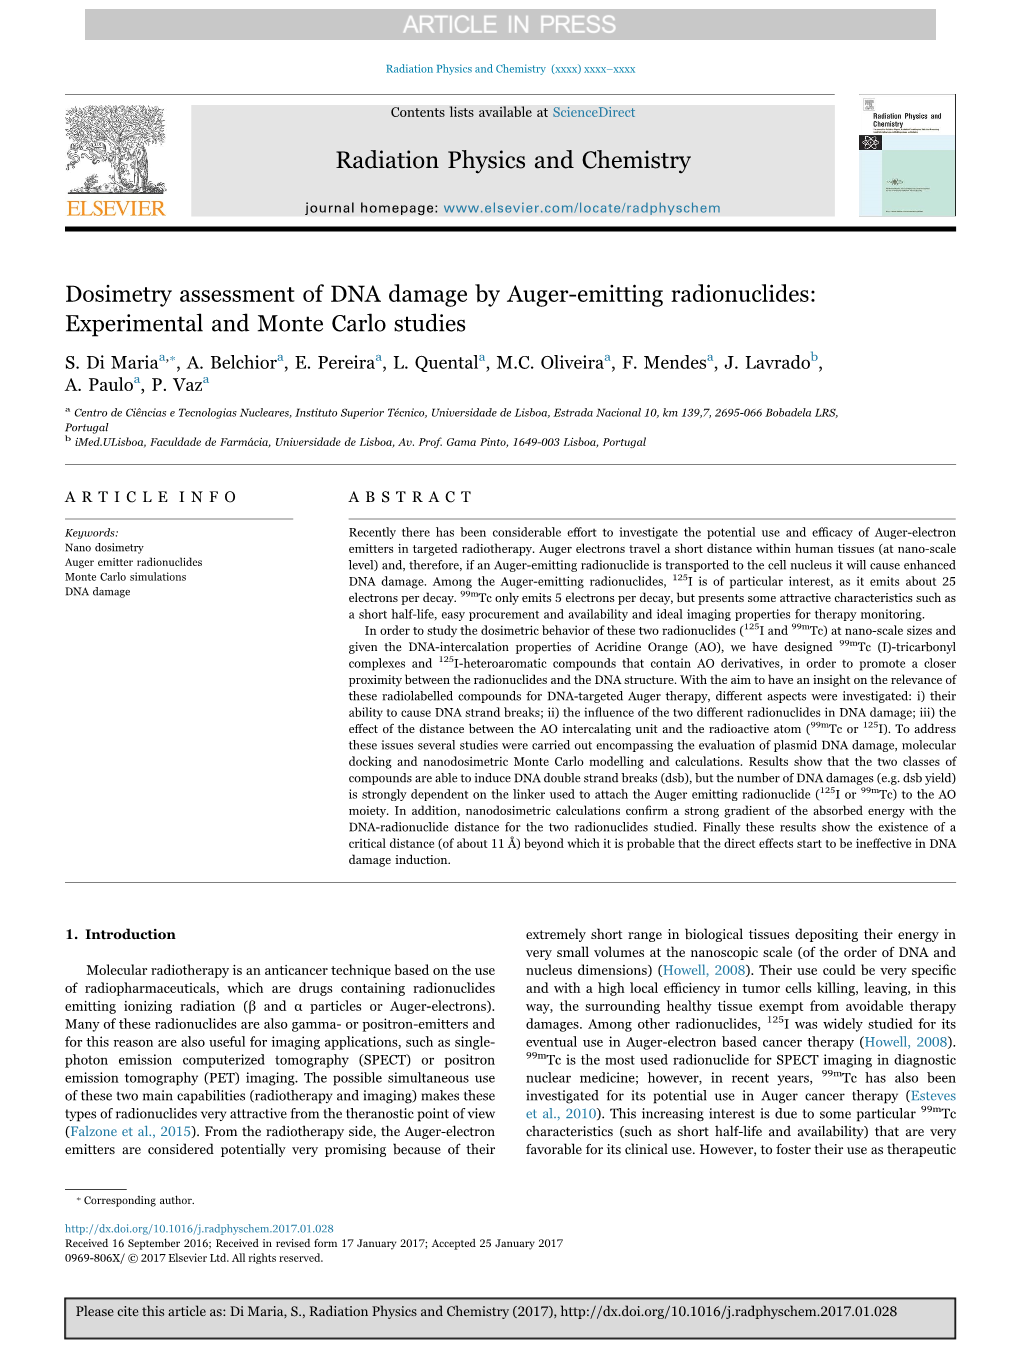 Dosimetry Assessment of DNA Damage by Auger-Emitting Radionuclides: Experimental and Monte Carlo Studies ⁎ S